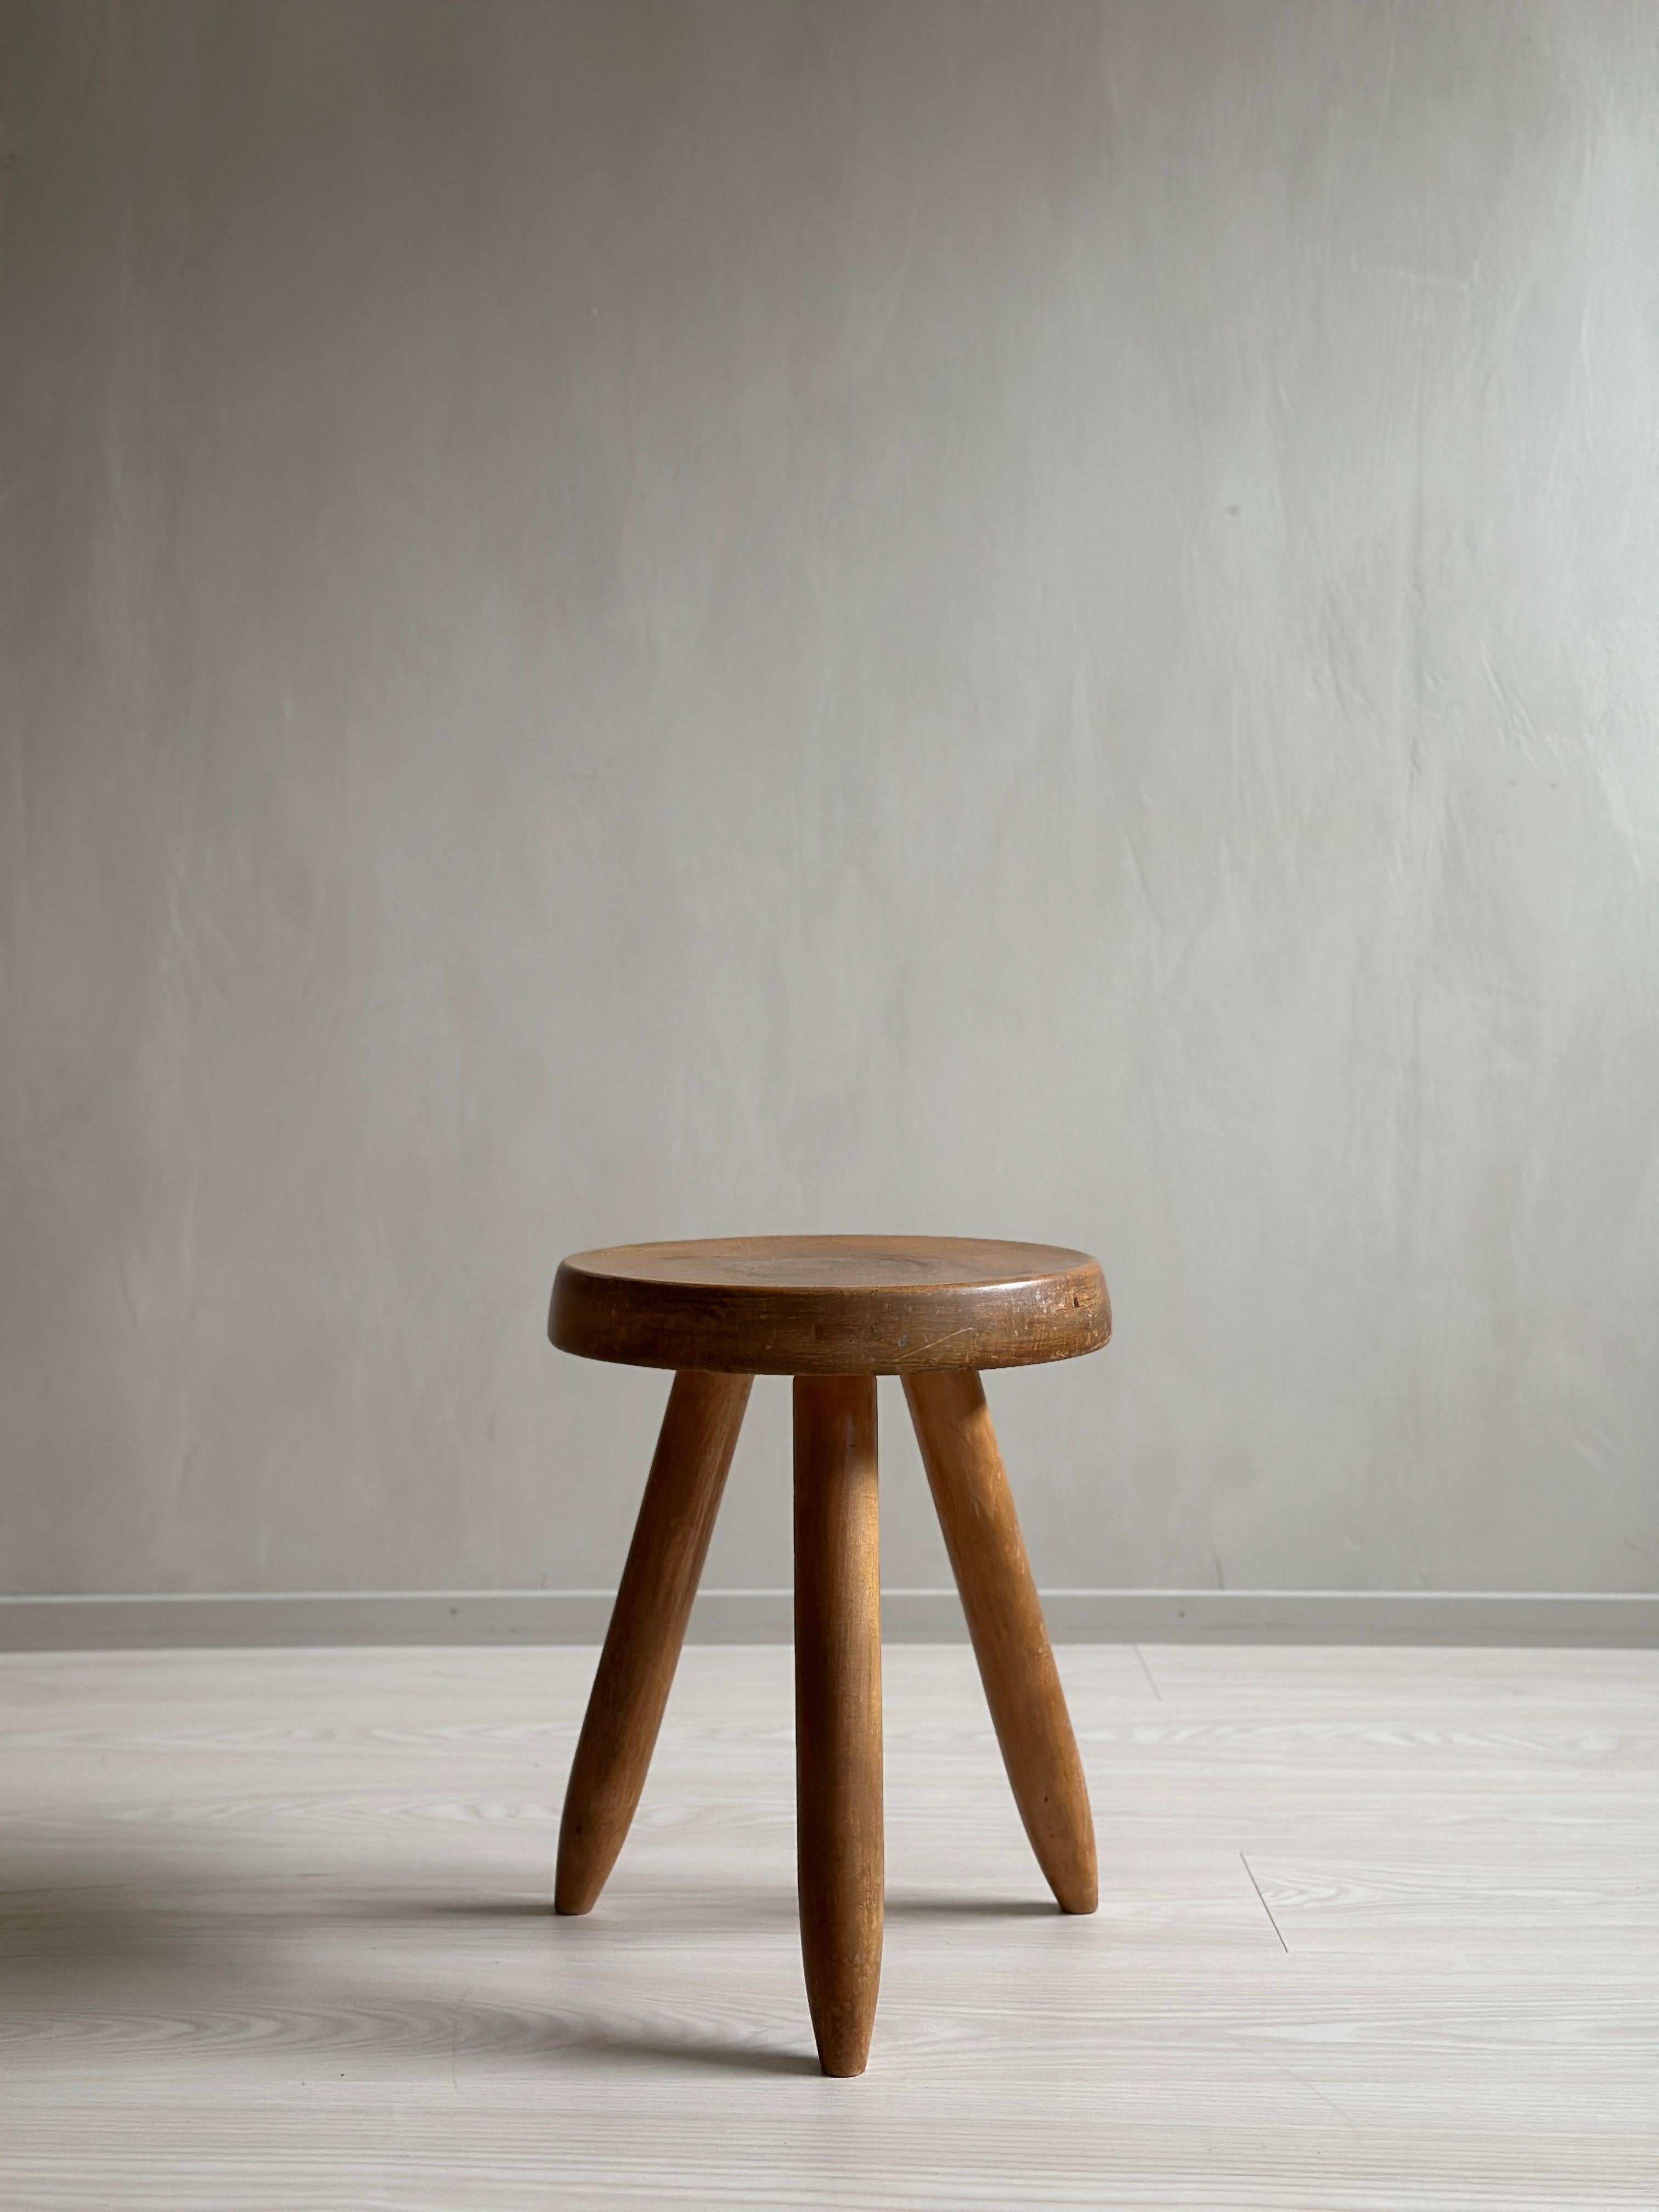 Charlotte Perriand (1903-1999)
High 'Berger' stool
Ashwood
Model created circa 1955
Measures: H 45 × Ø 32,5 cm
Bibliography:
- Charlotte Perriand, L'Œuvre complète, Vol. 3: 1956-1968, J. Barsac, Ed. Norma, 2017, similar models pp. 14-15,